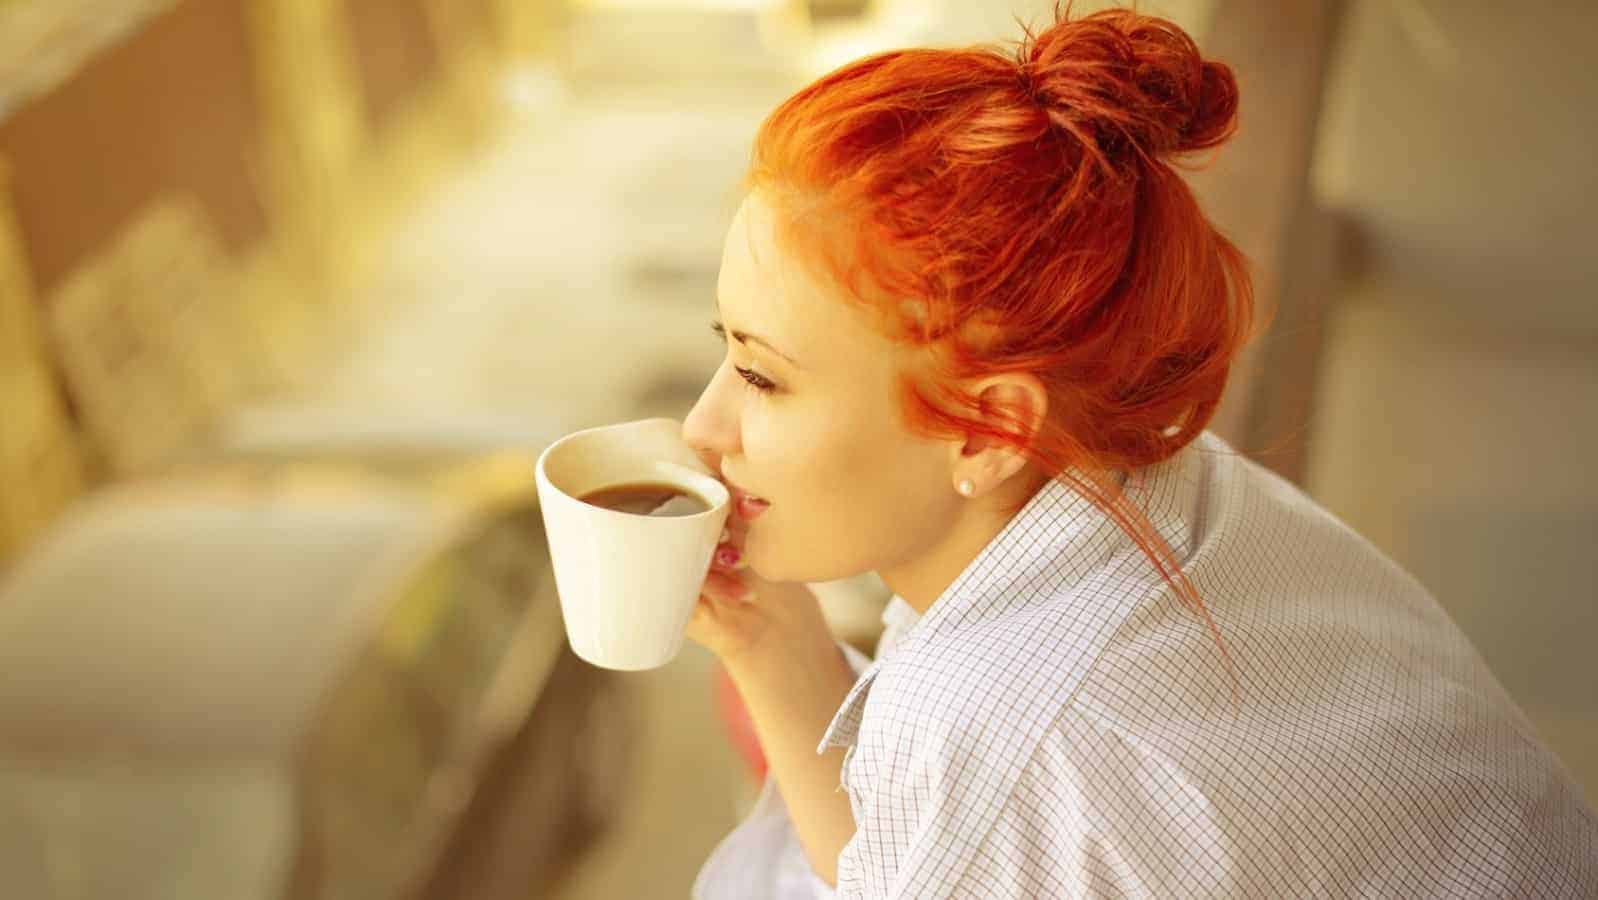 Researchers Explain The Health Benefits And Risks of Coffee